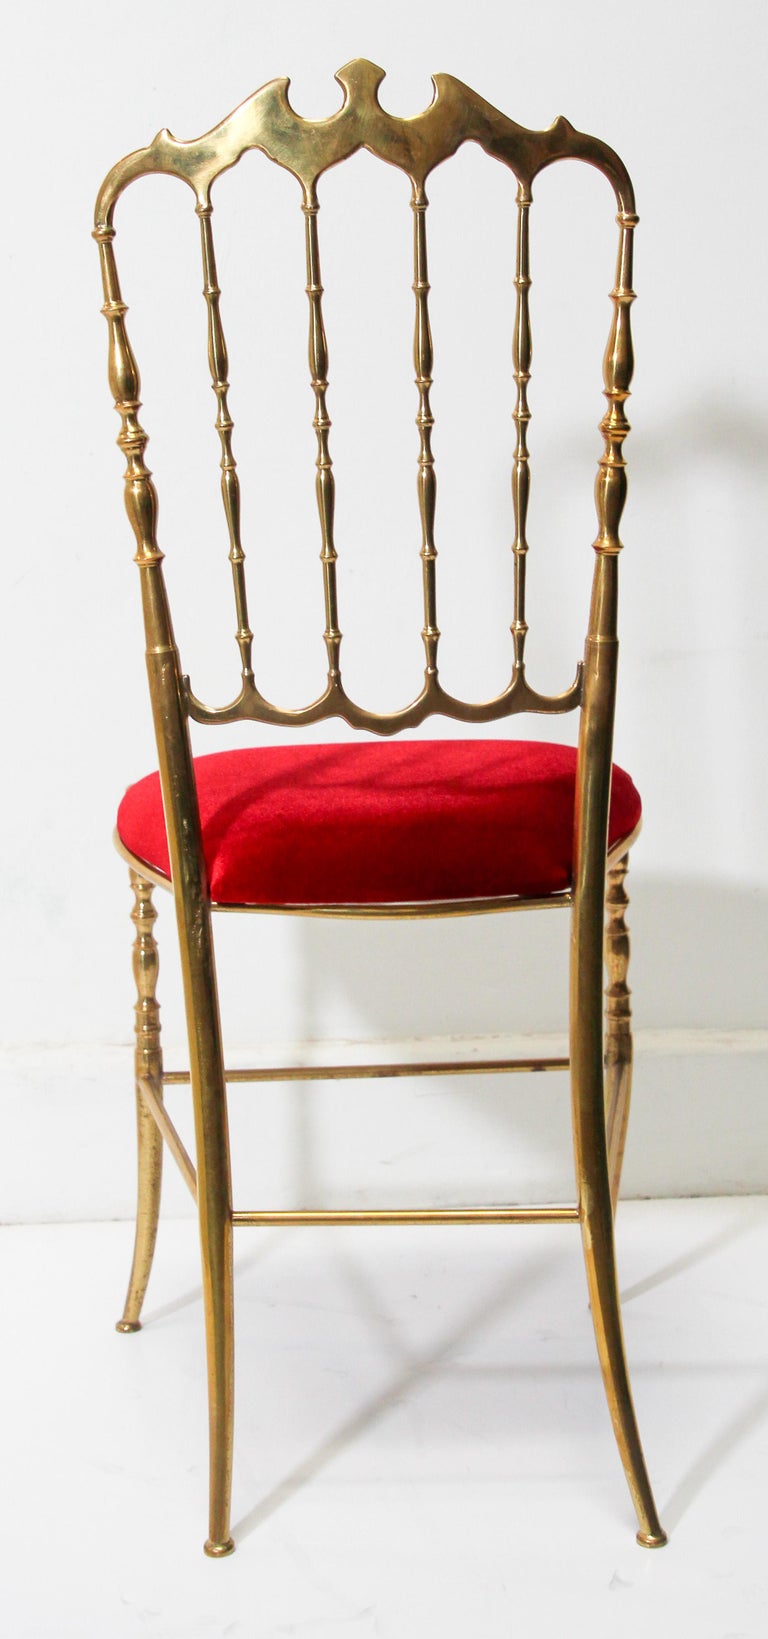 Mid-20th Century Polished Brass Chiavari Chair with Red Velvet, Italy, 1960s For Sale